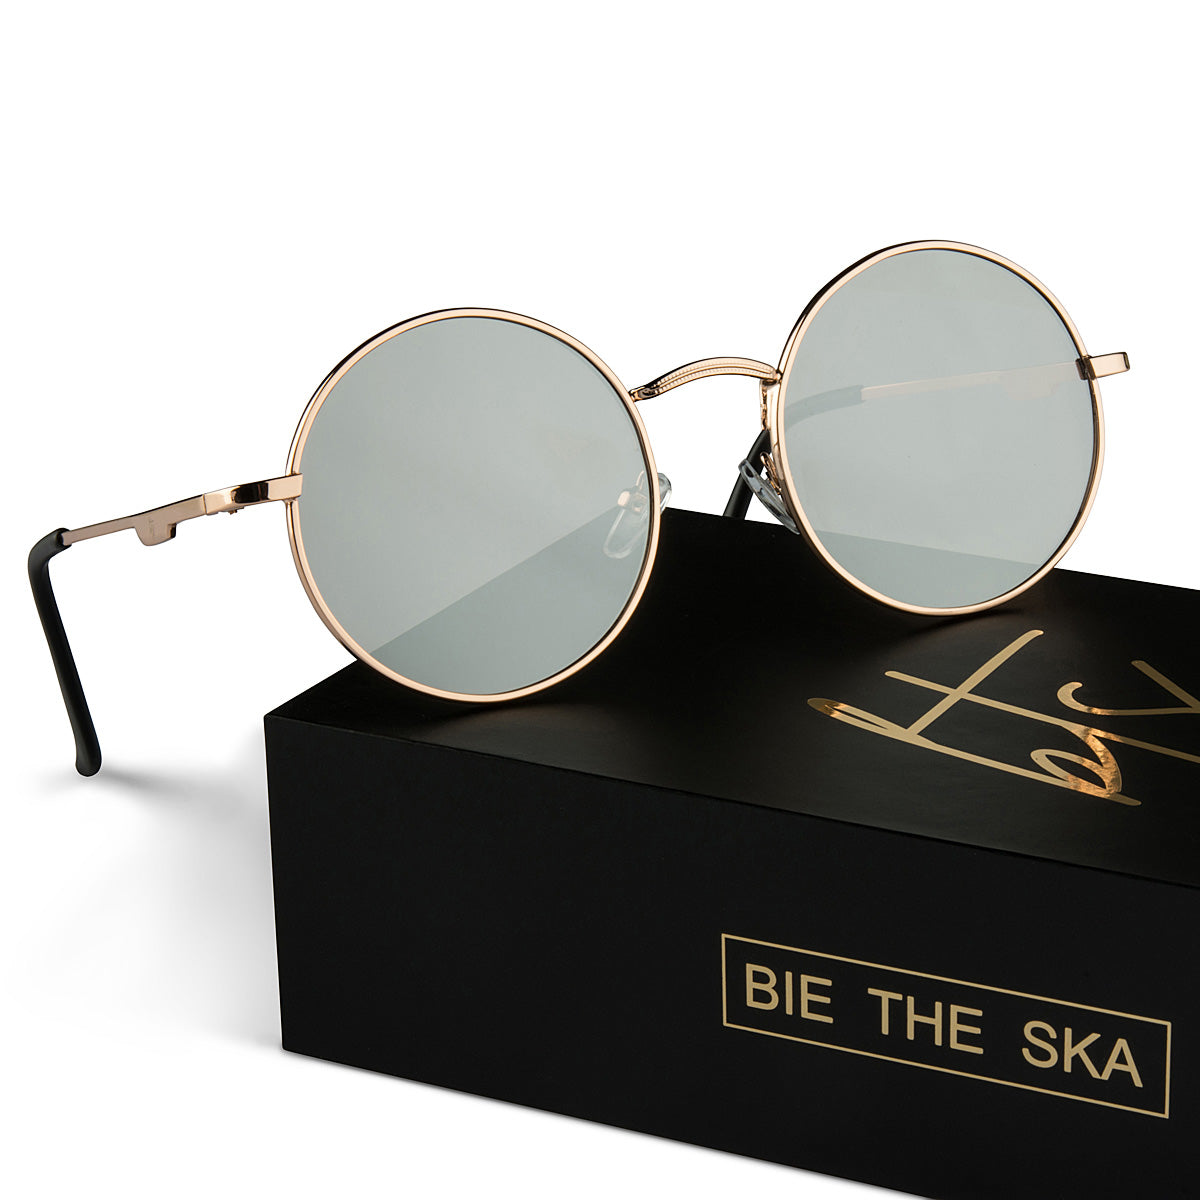 bie the ska gold round glasses thailand influencers packaging